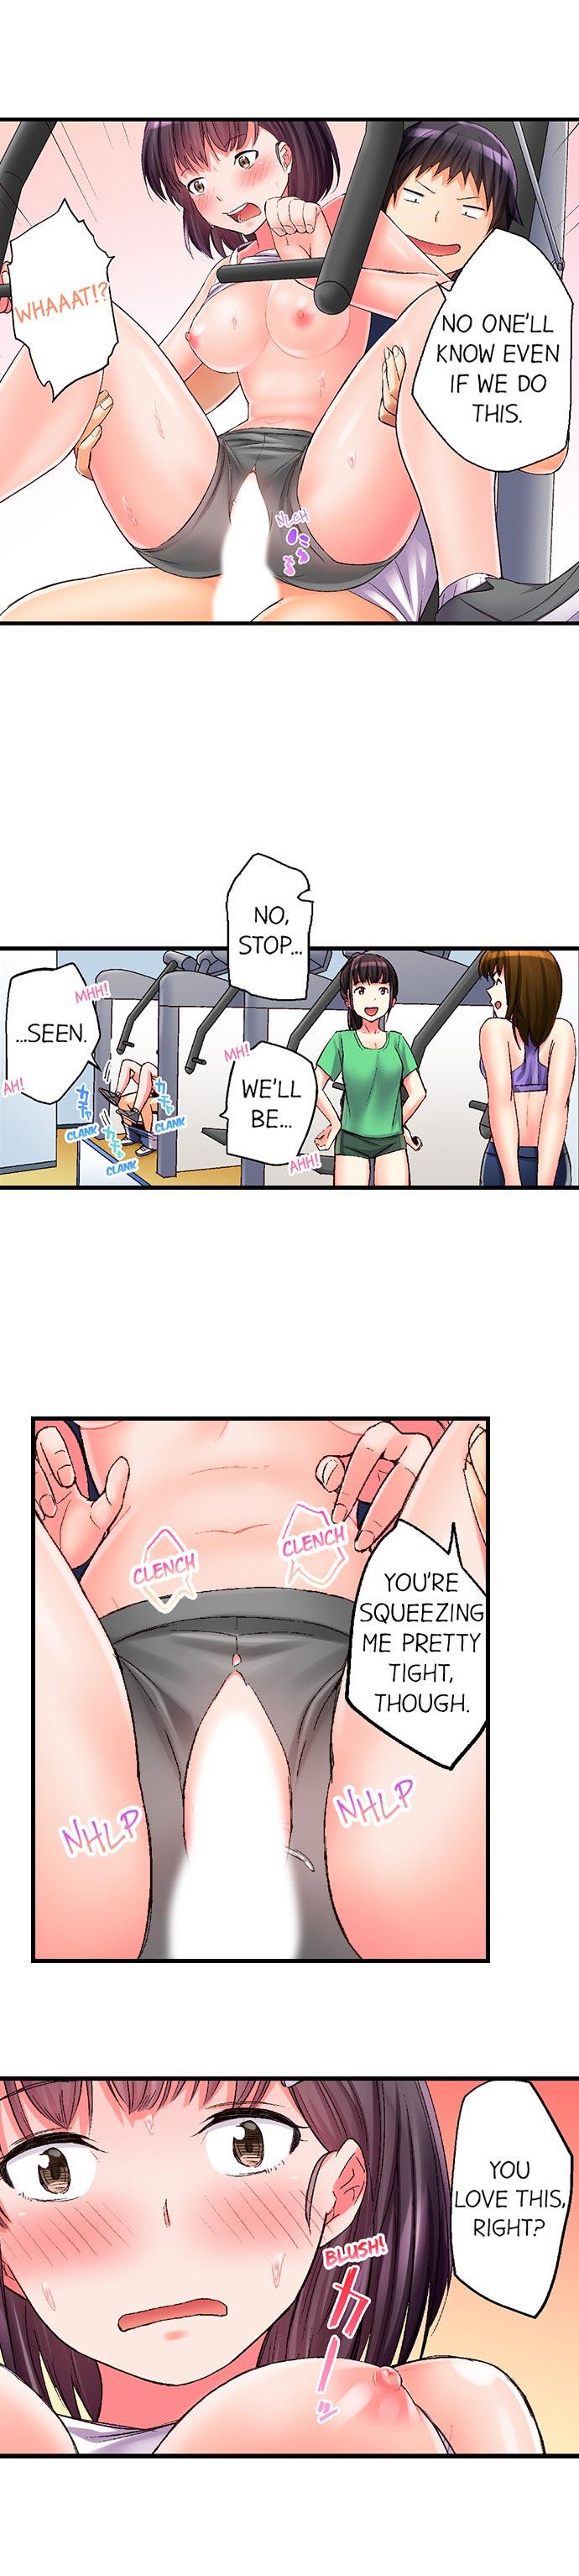 No Panty Booty Workout! Ch. 1 - 15 105